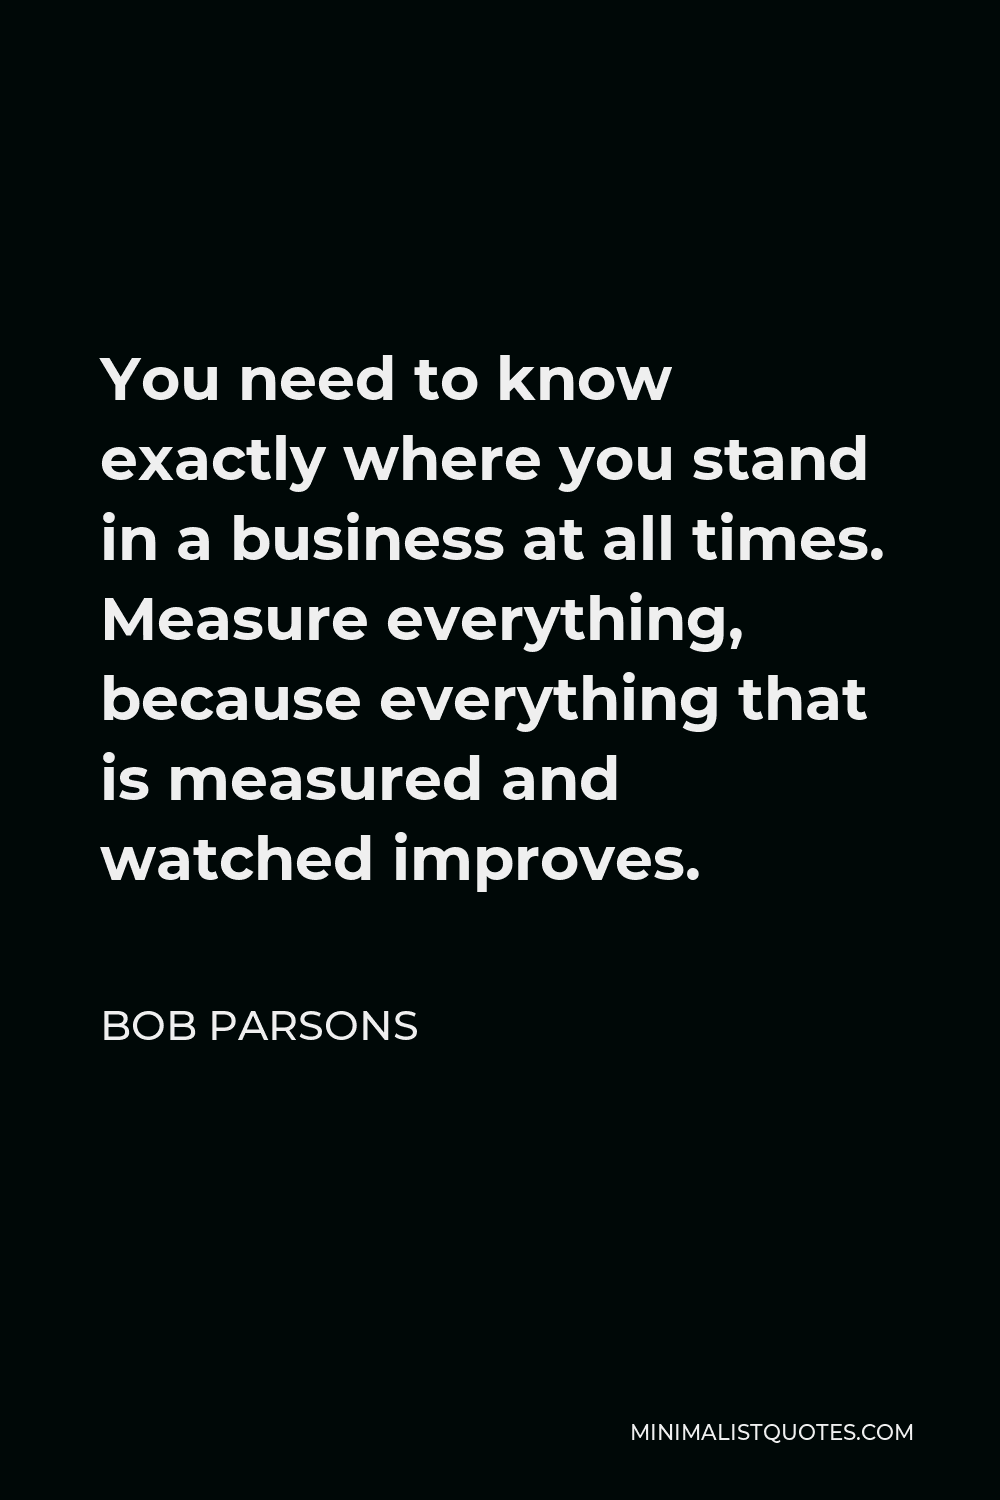 Bob Parsons Quote - You need to know exactly where you stand in a business at all times. Measure everything, because everything that is measured and watched improves.